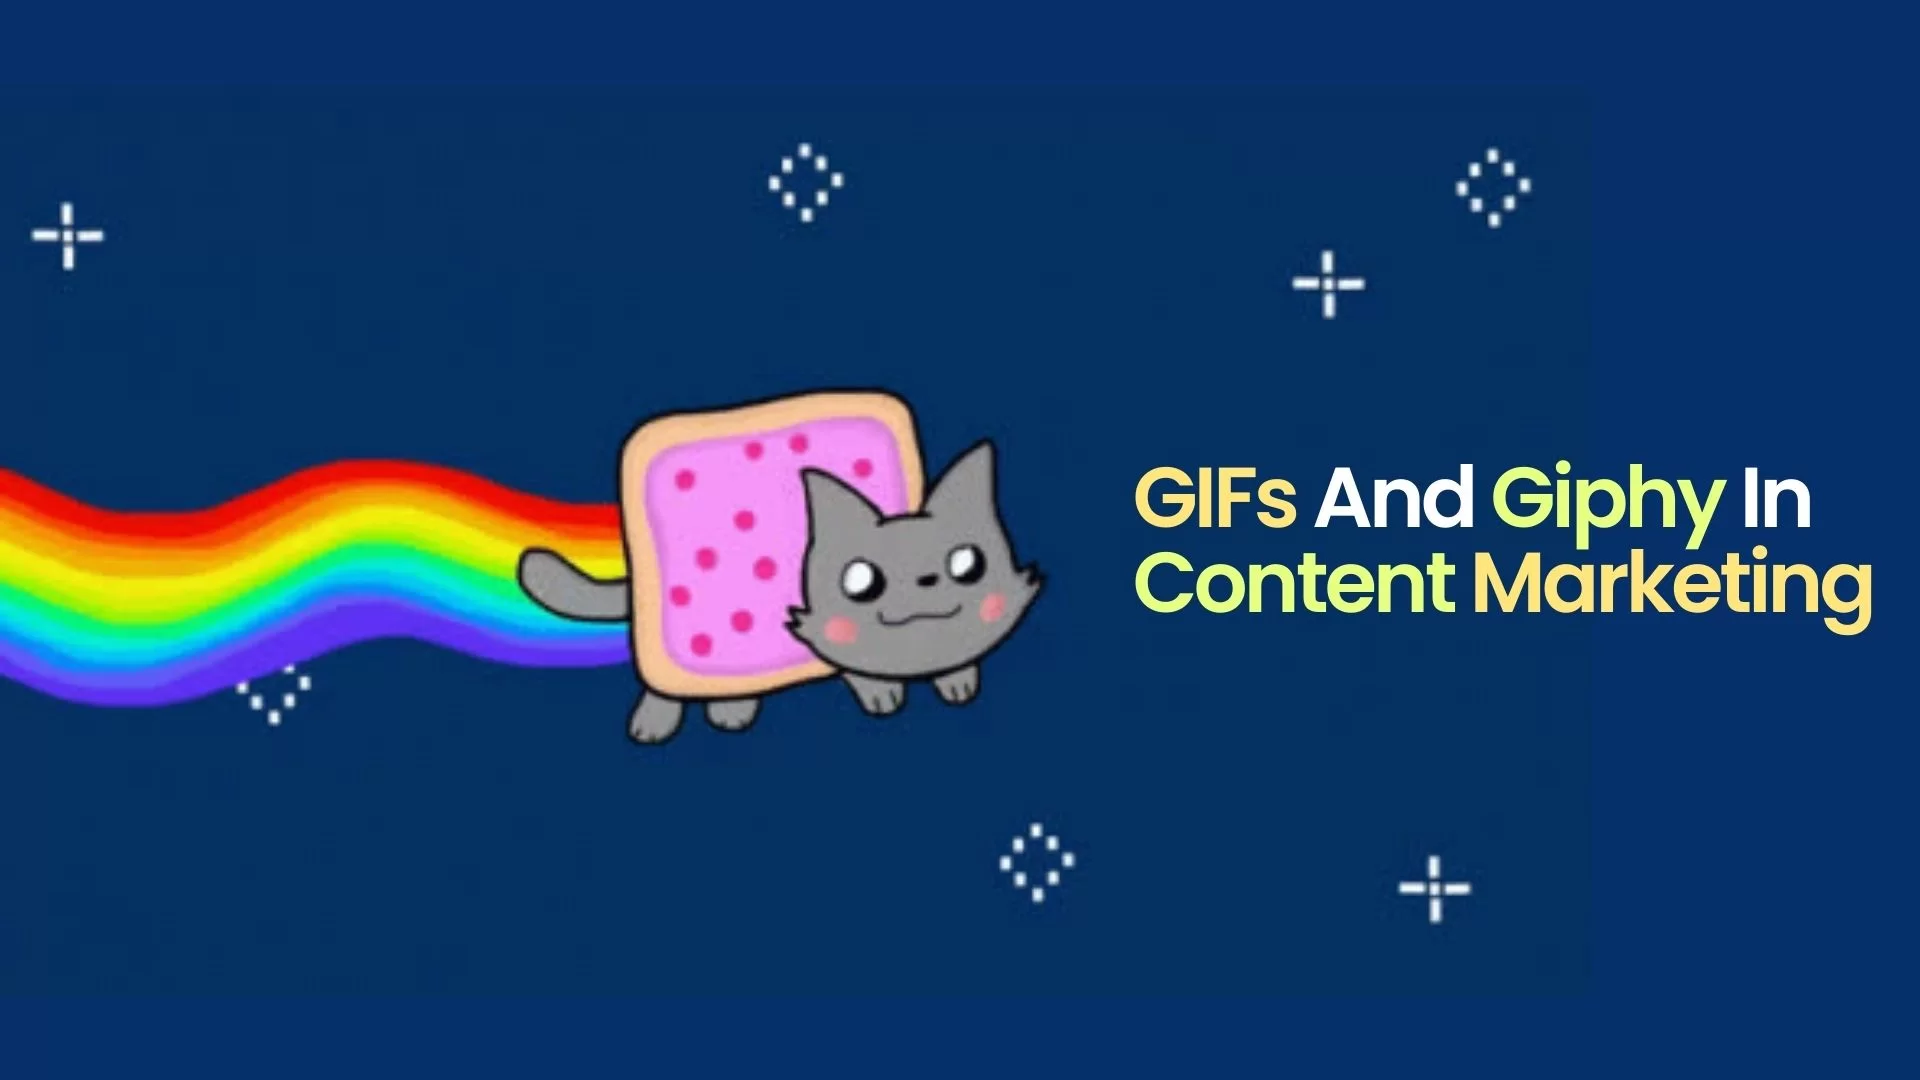 Why Use GIFs And Giphy In Marketing